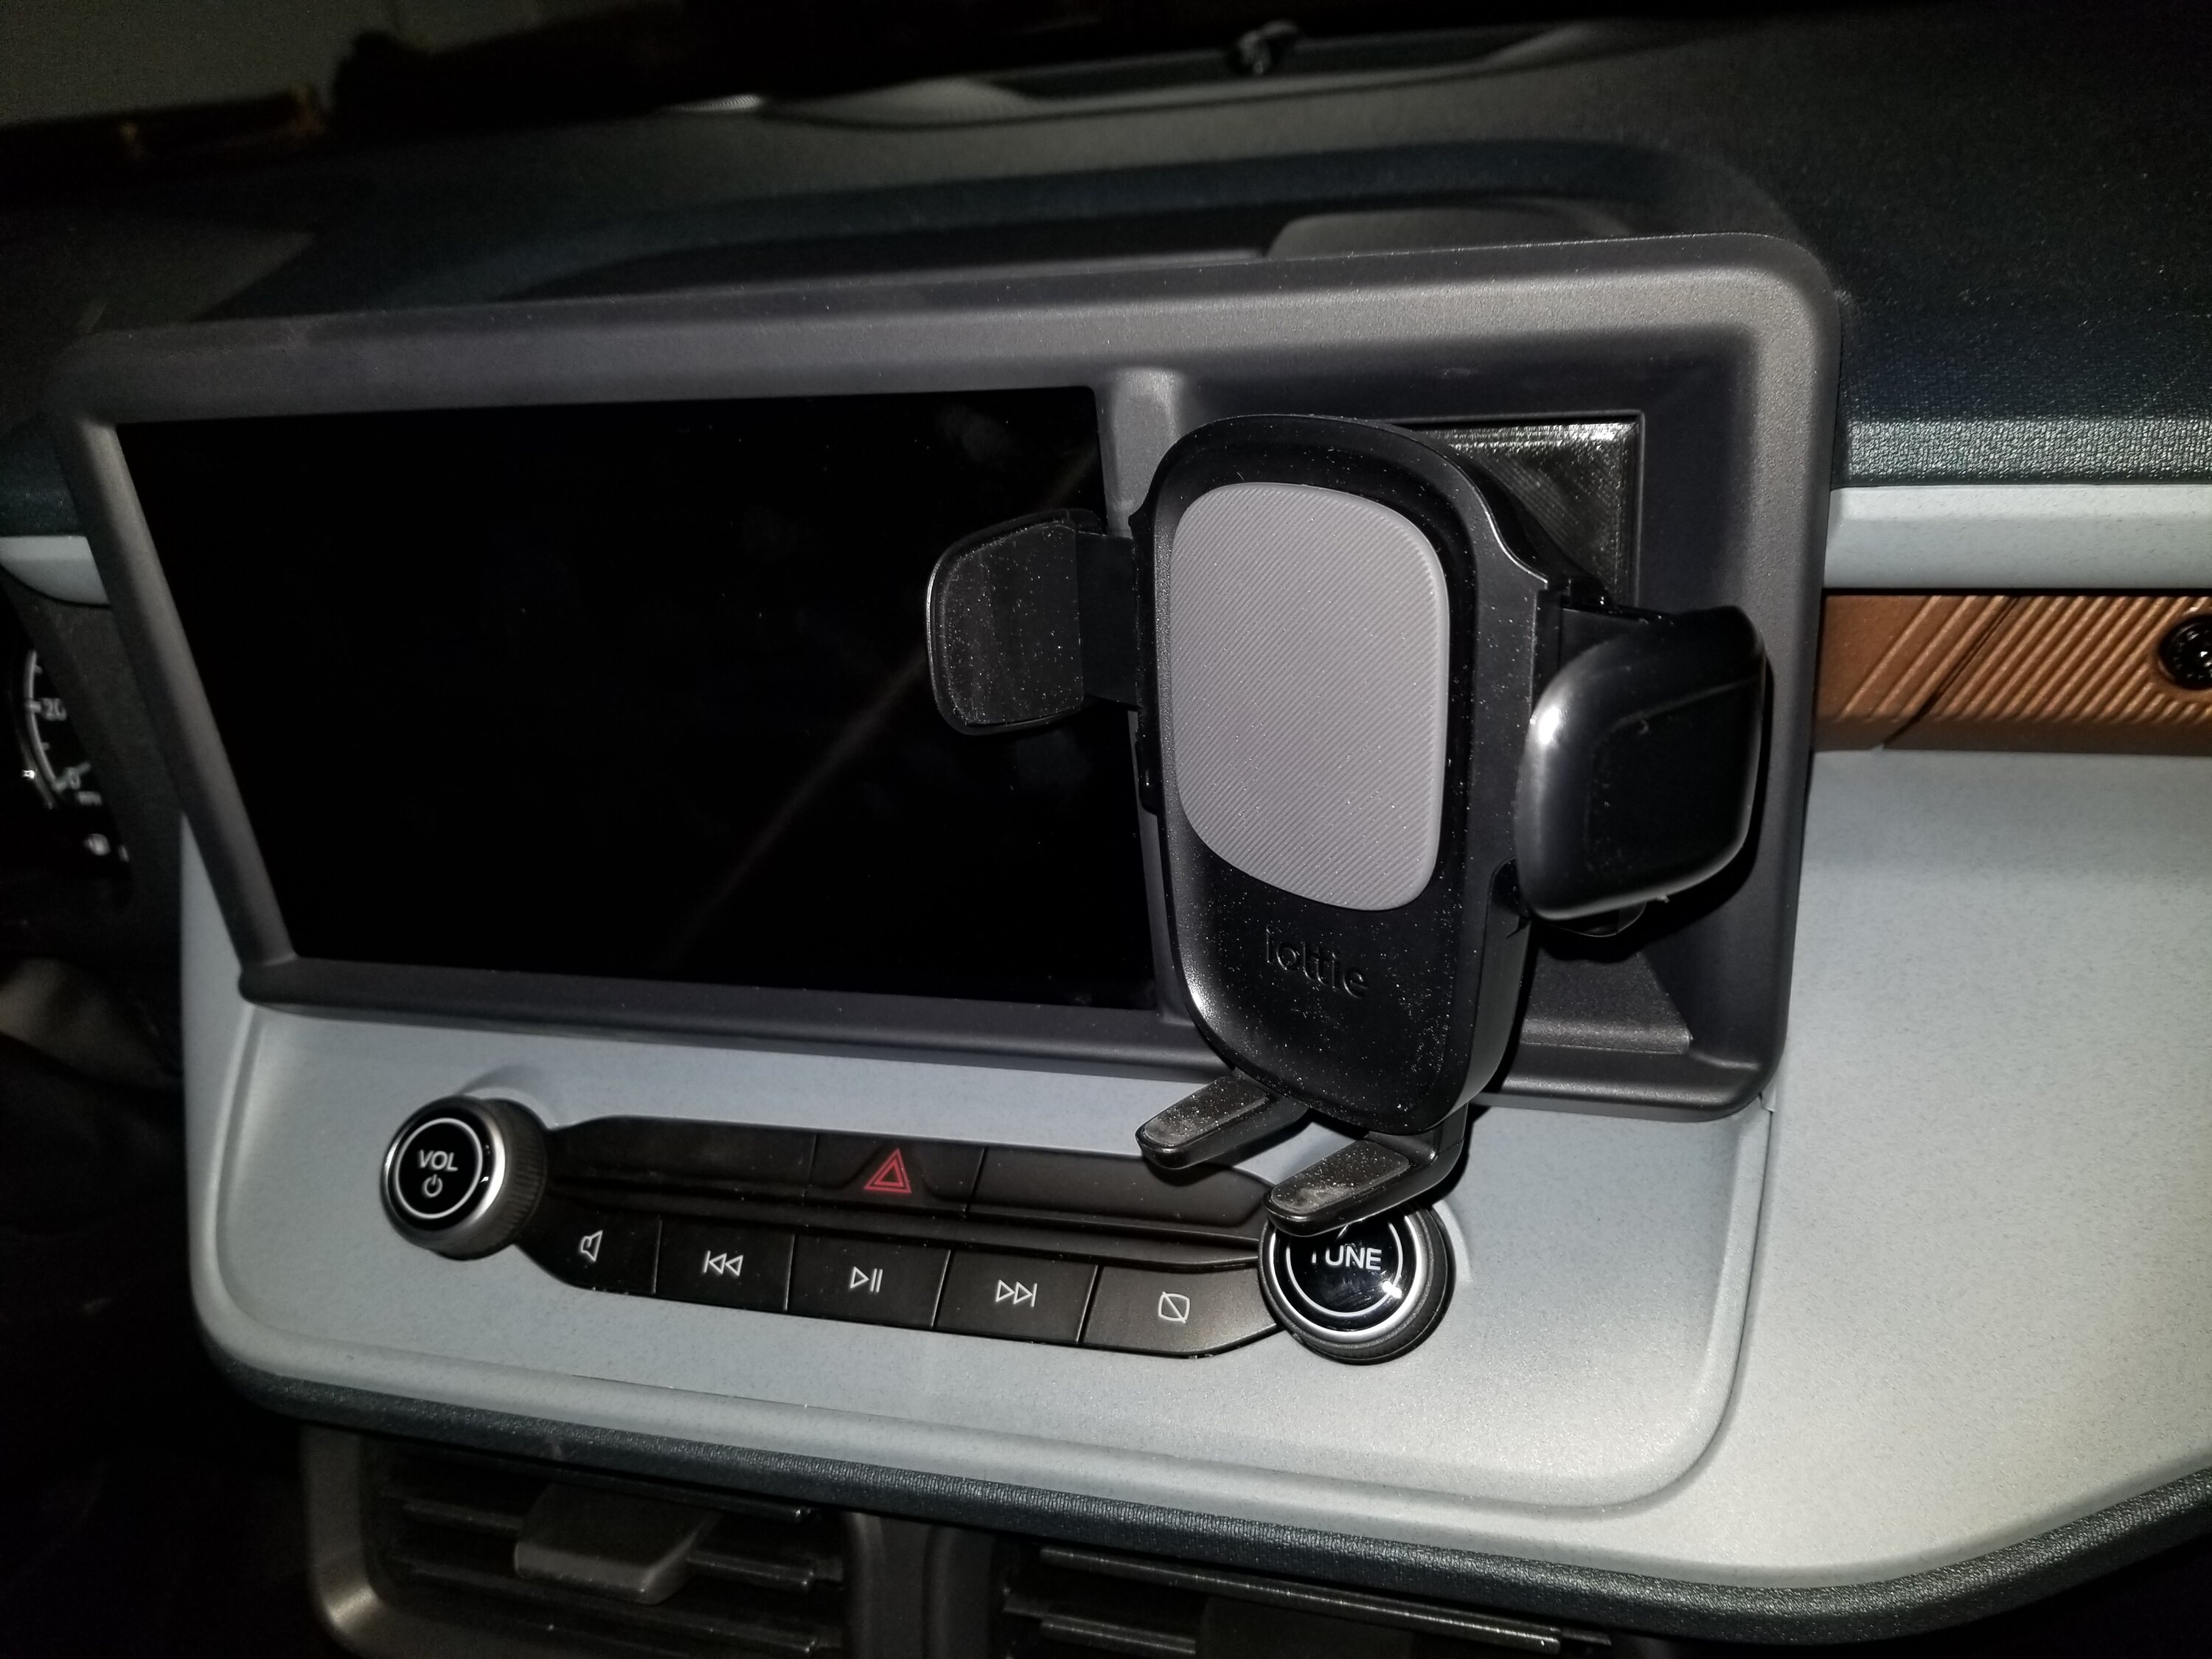 Ford Maverick Dash cubby hole -- what's in yours? 📸 20230222_215141